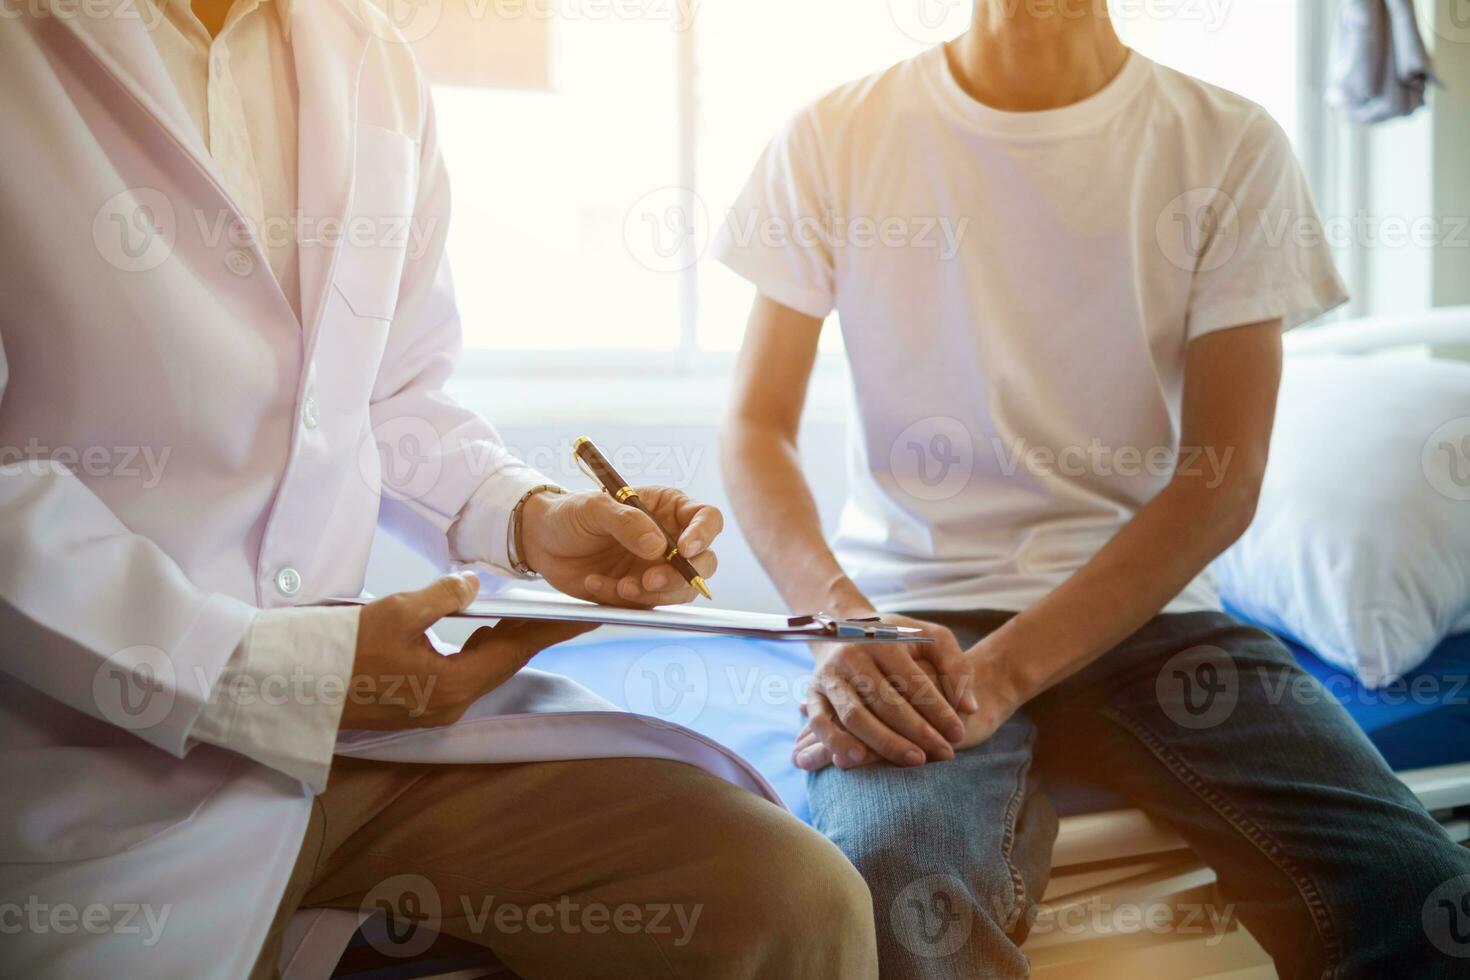 doctor is having consultation discussing prostate cancer and venereal cancer detected in young man. Current doctors provide advice and counseling on detecting prostate cancer and treating it properly. photo